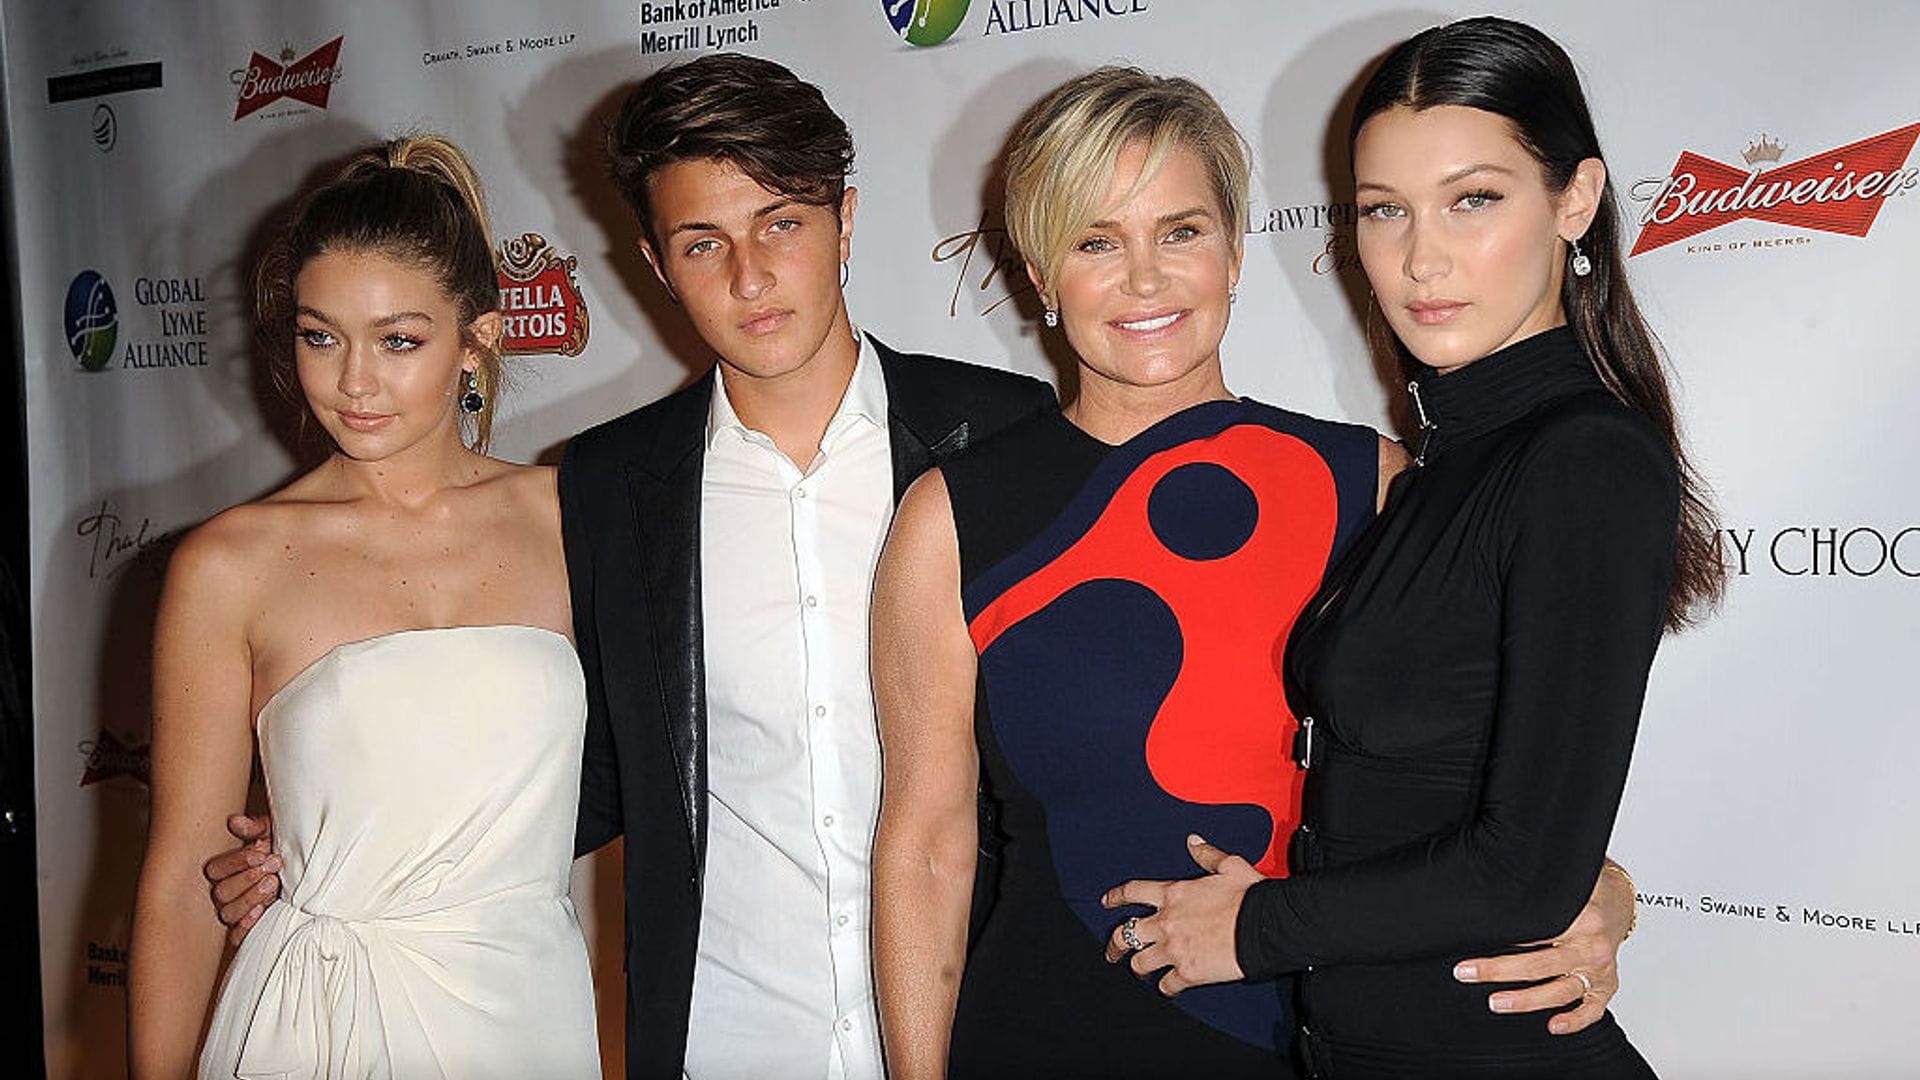 Yolanda Hadid on dropping Foster and whether she approves of Bella and Gigi's relationships